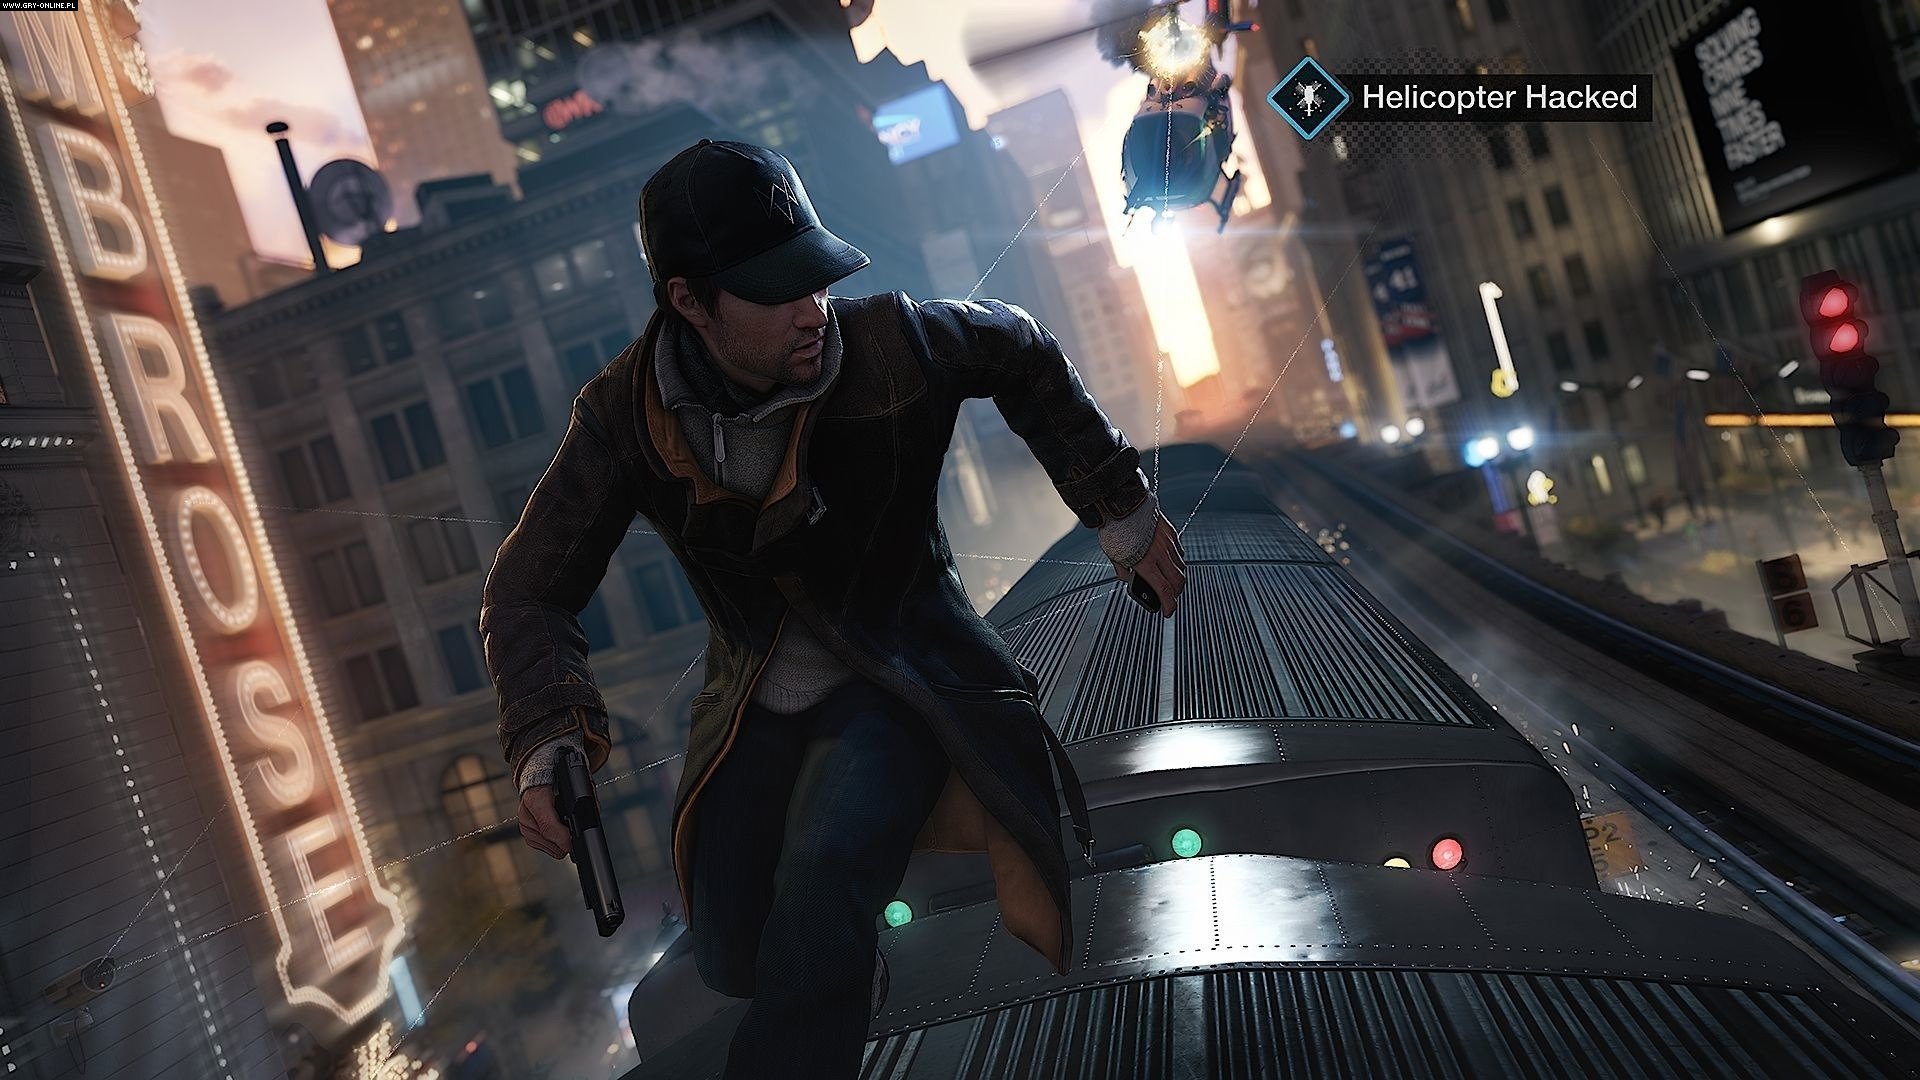 Video Game Watch Dogs HD Wallpaper | Background Image